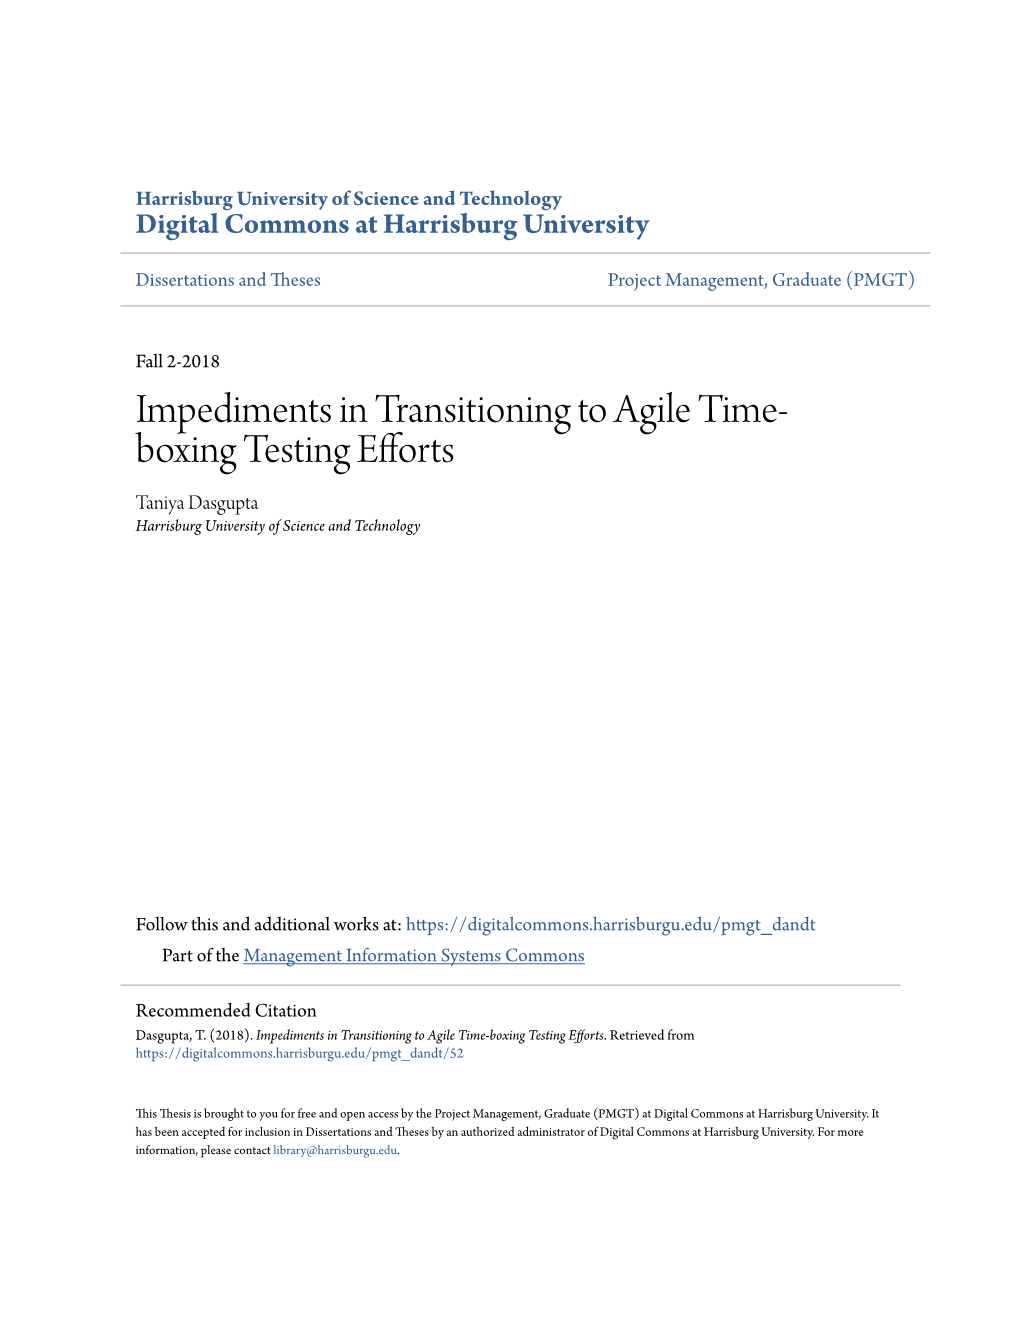 Impediments in Transitioning to Agile Time-Boxing Testing Efforts